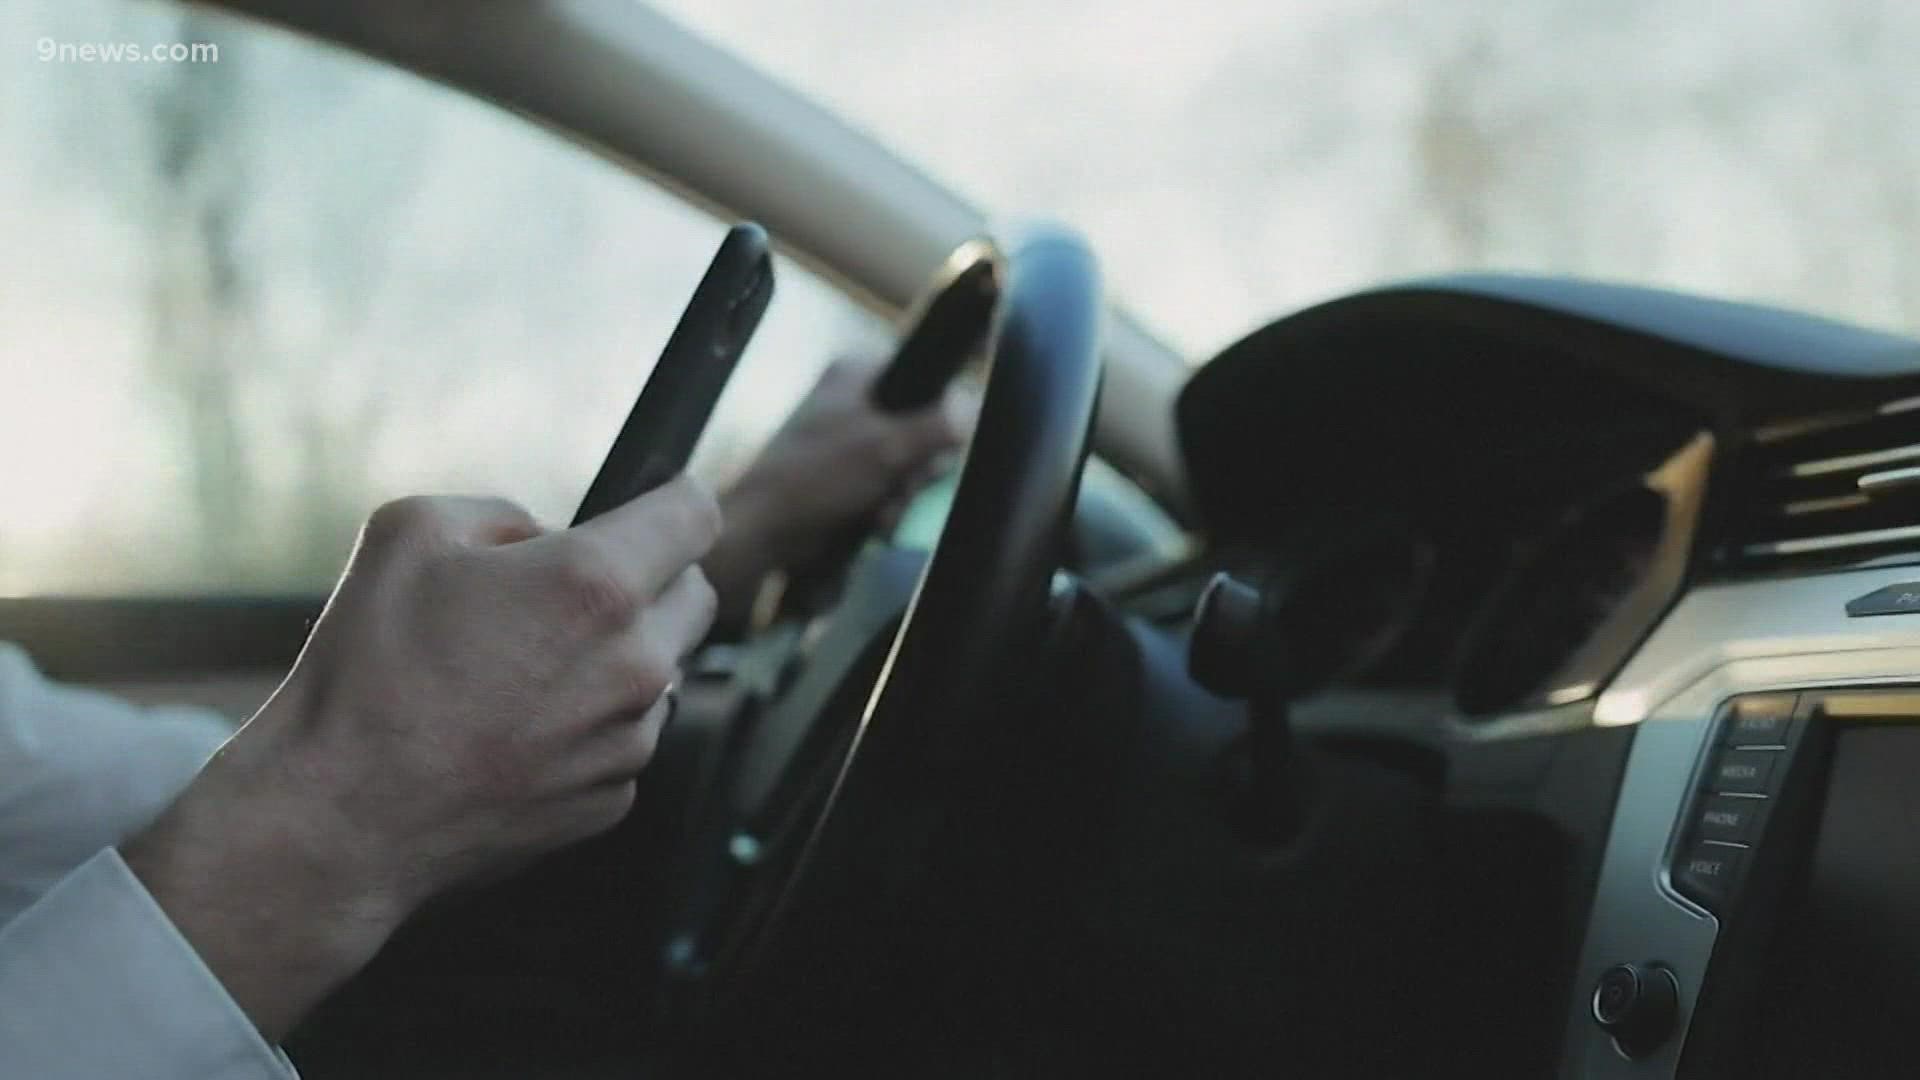 A new study says 70% of drivers have sneaked a peak or used their phone while behind the wheel recently.